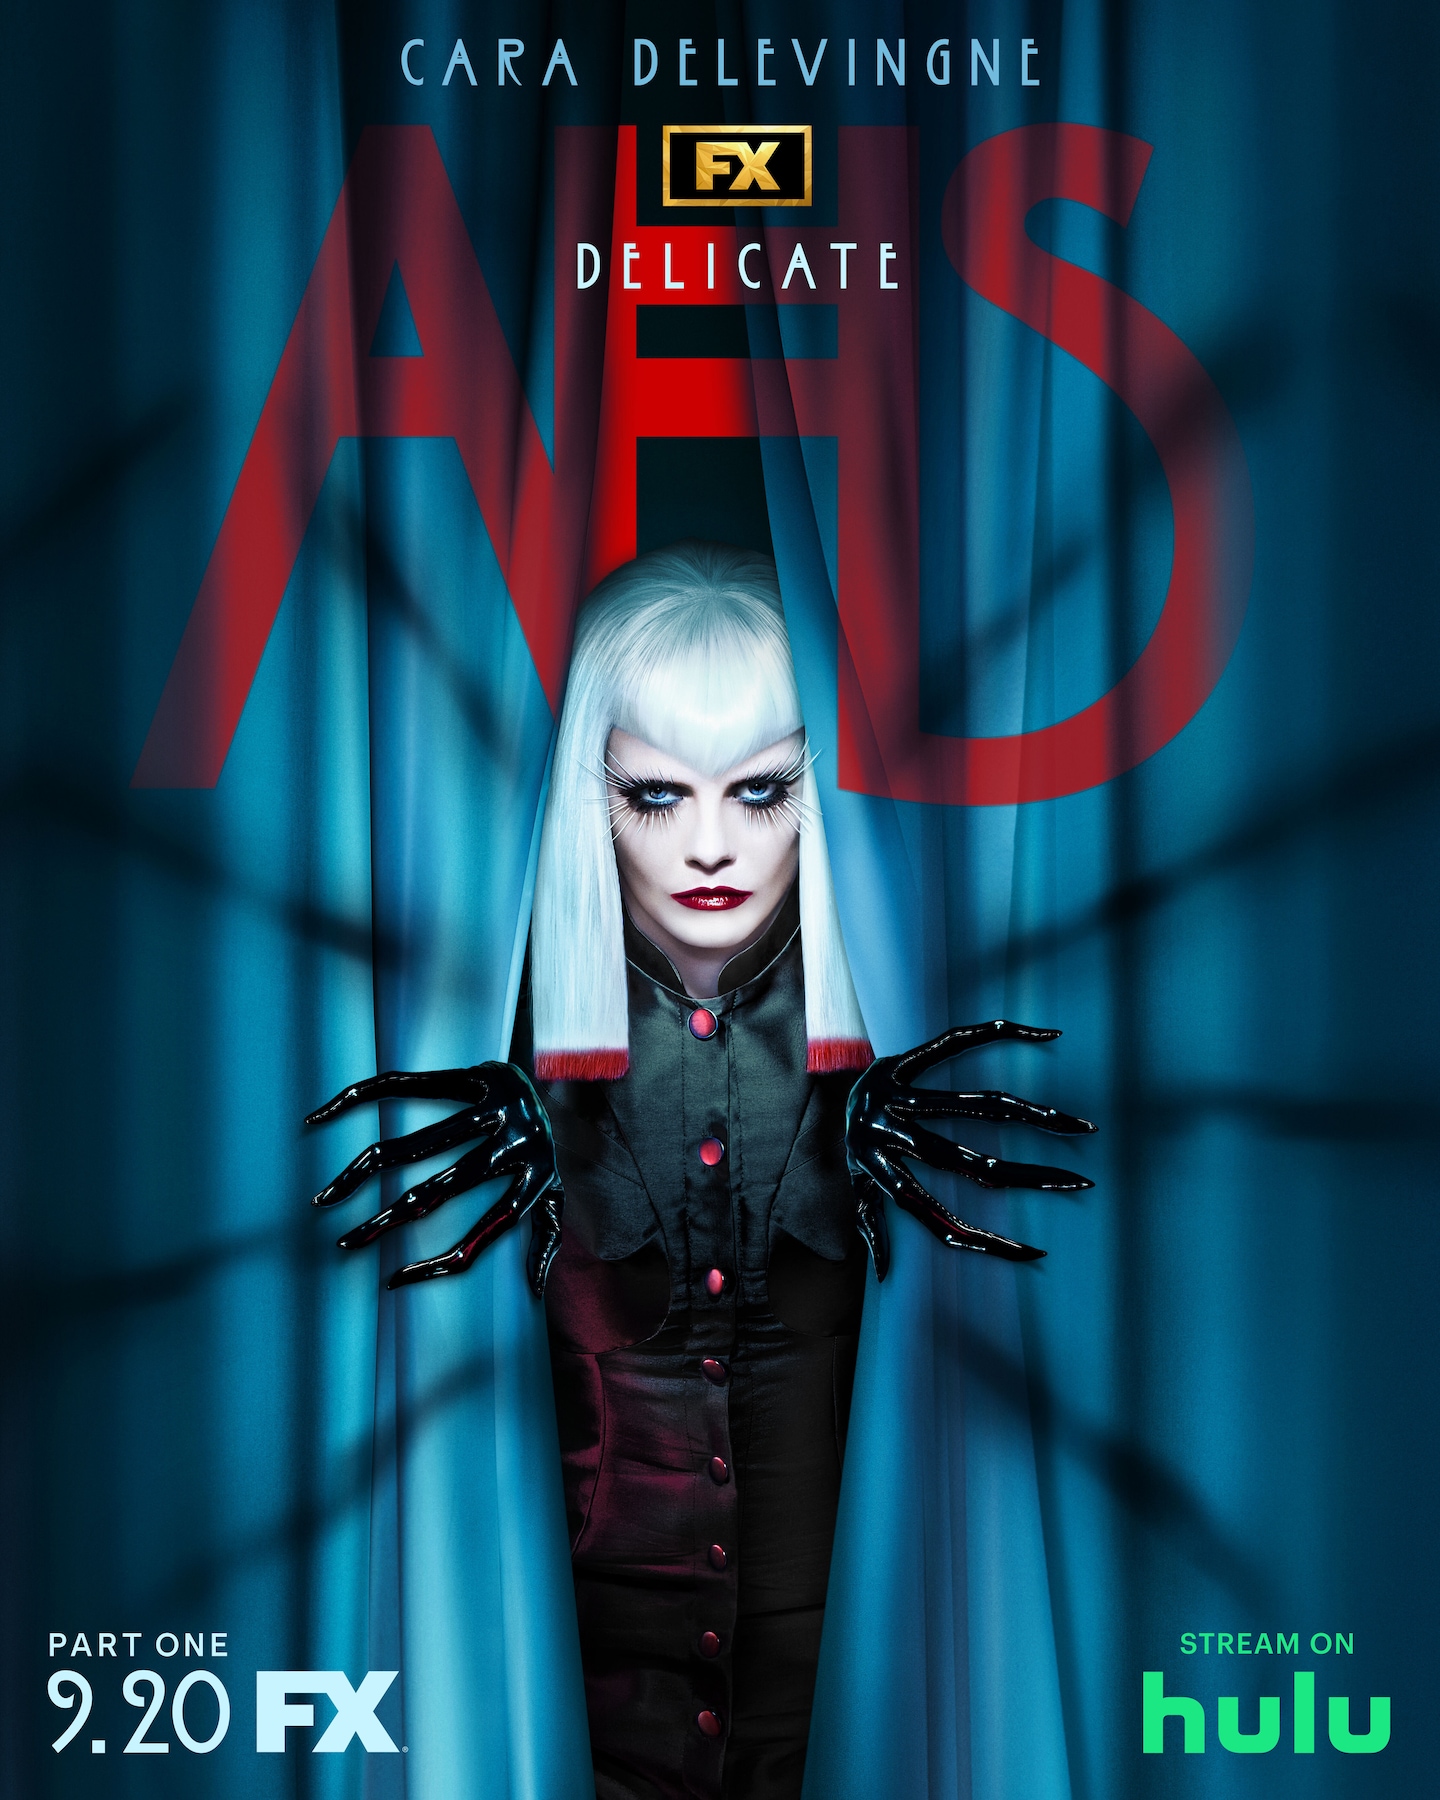 A woman with white hair wearing black latex gloves and peaking out of a gray curtain for AHS: Delicate